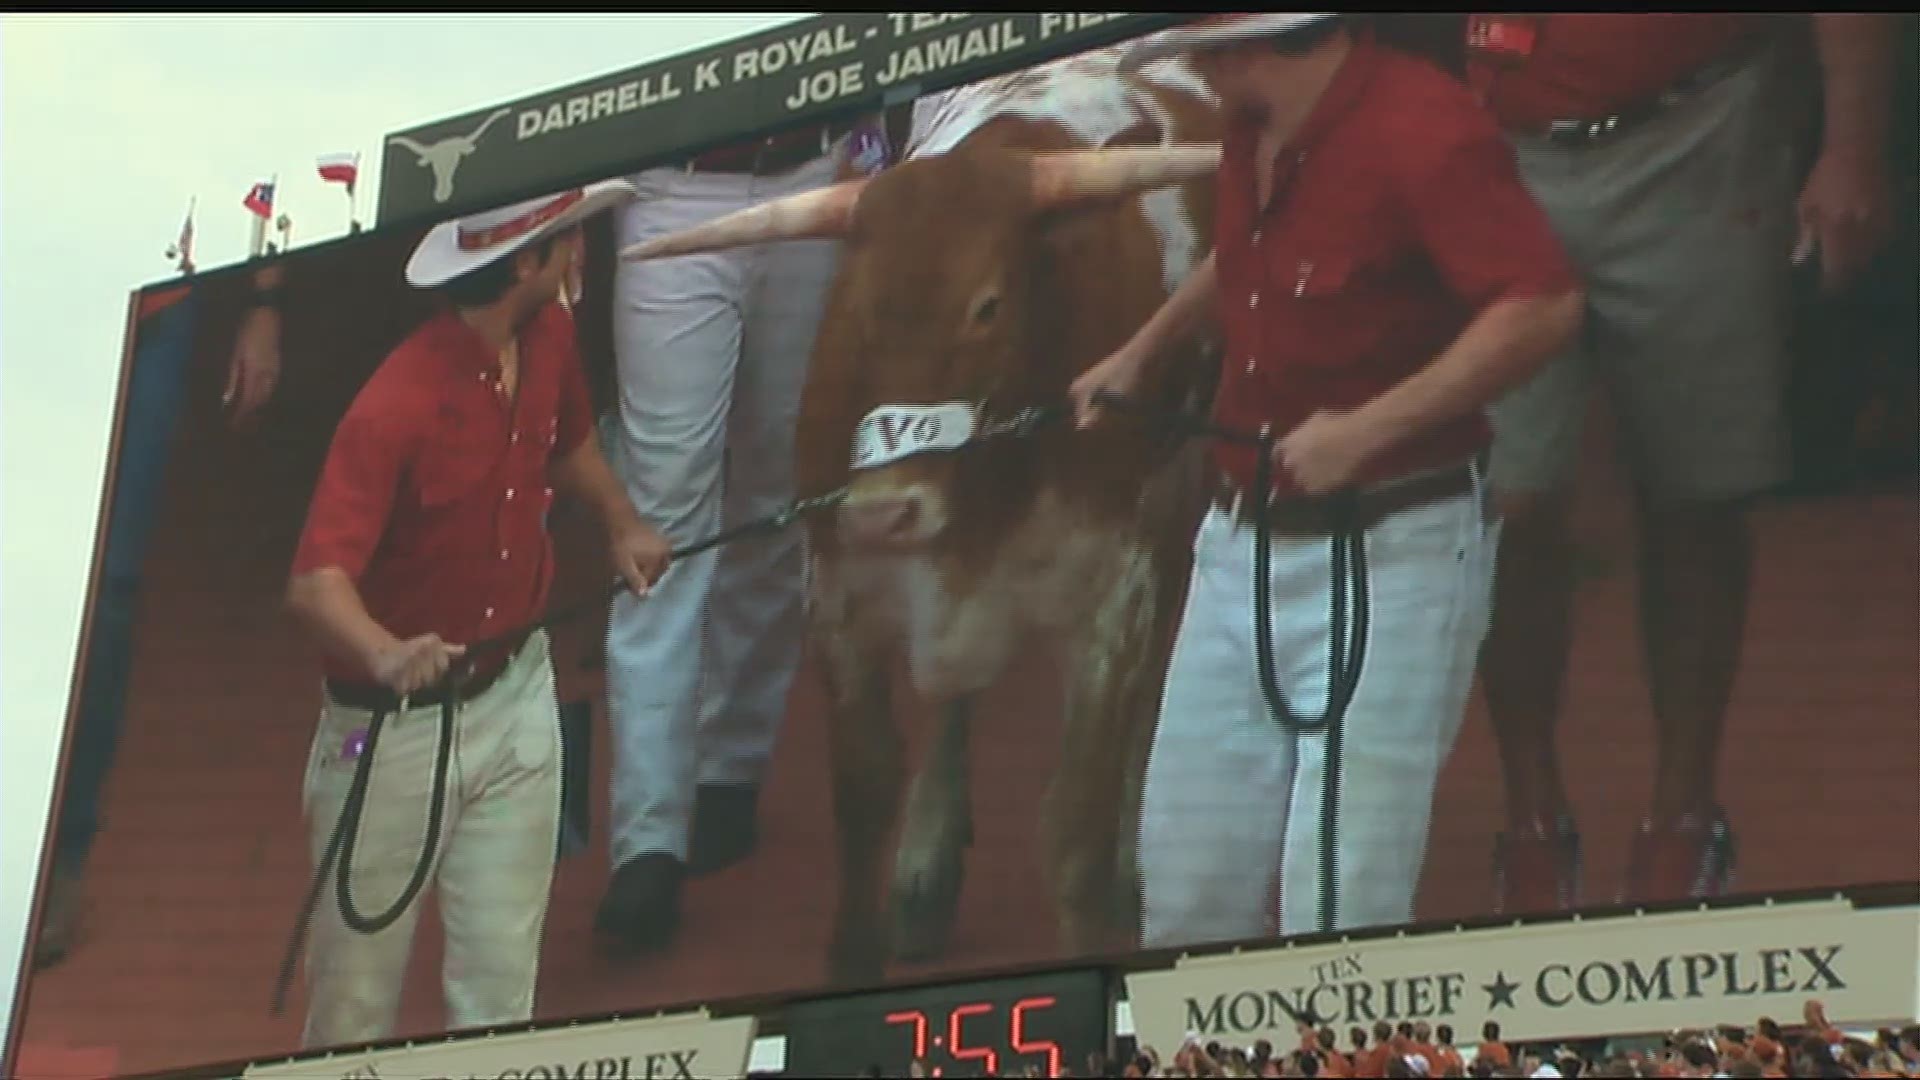 Bevo XV is celebrating his 4th birthday. This video begins with his debut prior to the season opener vs Notre Dame in 2016.